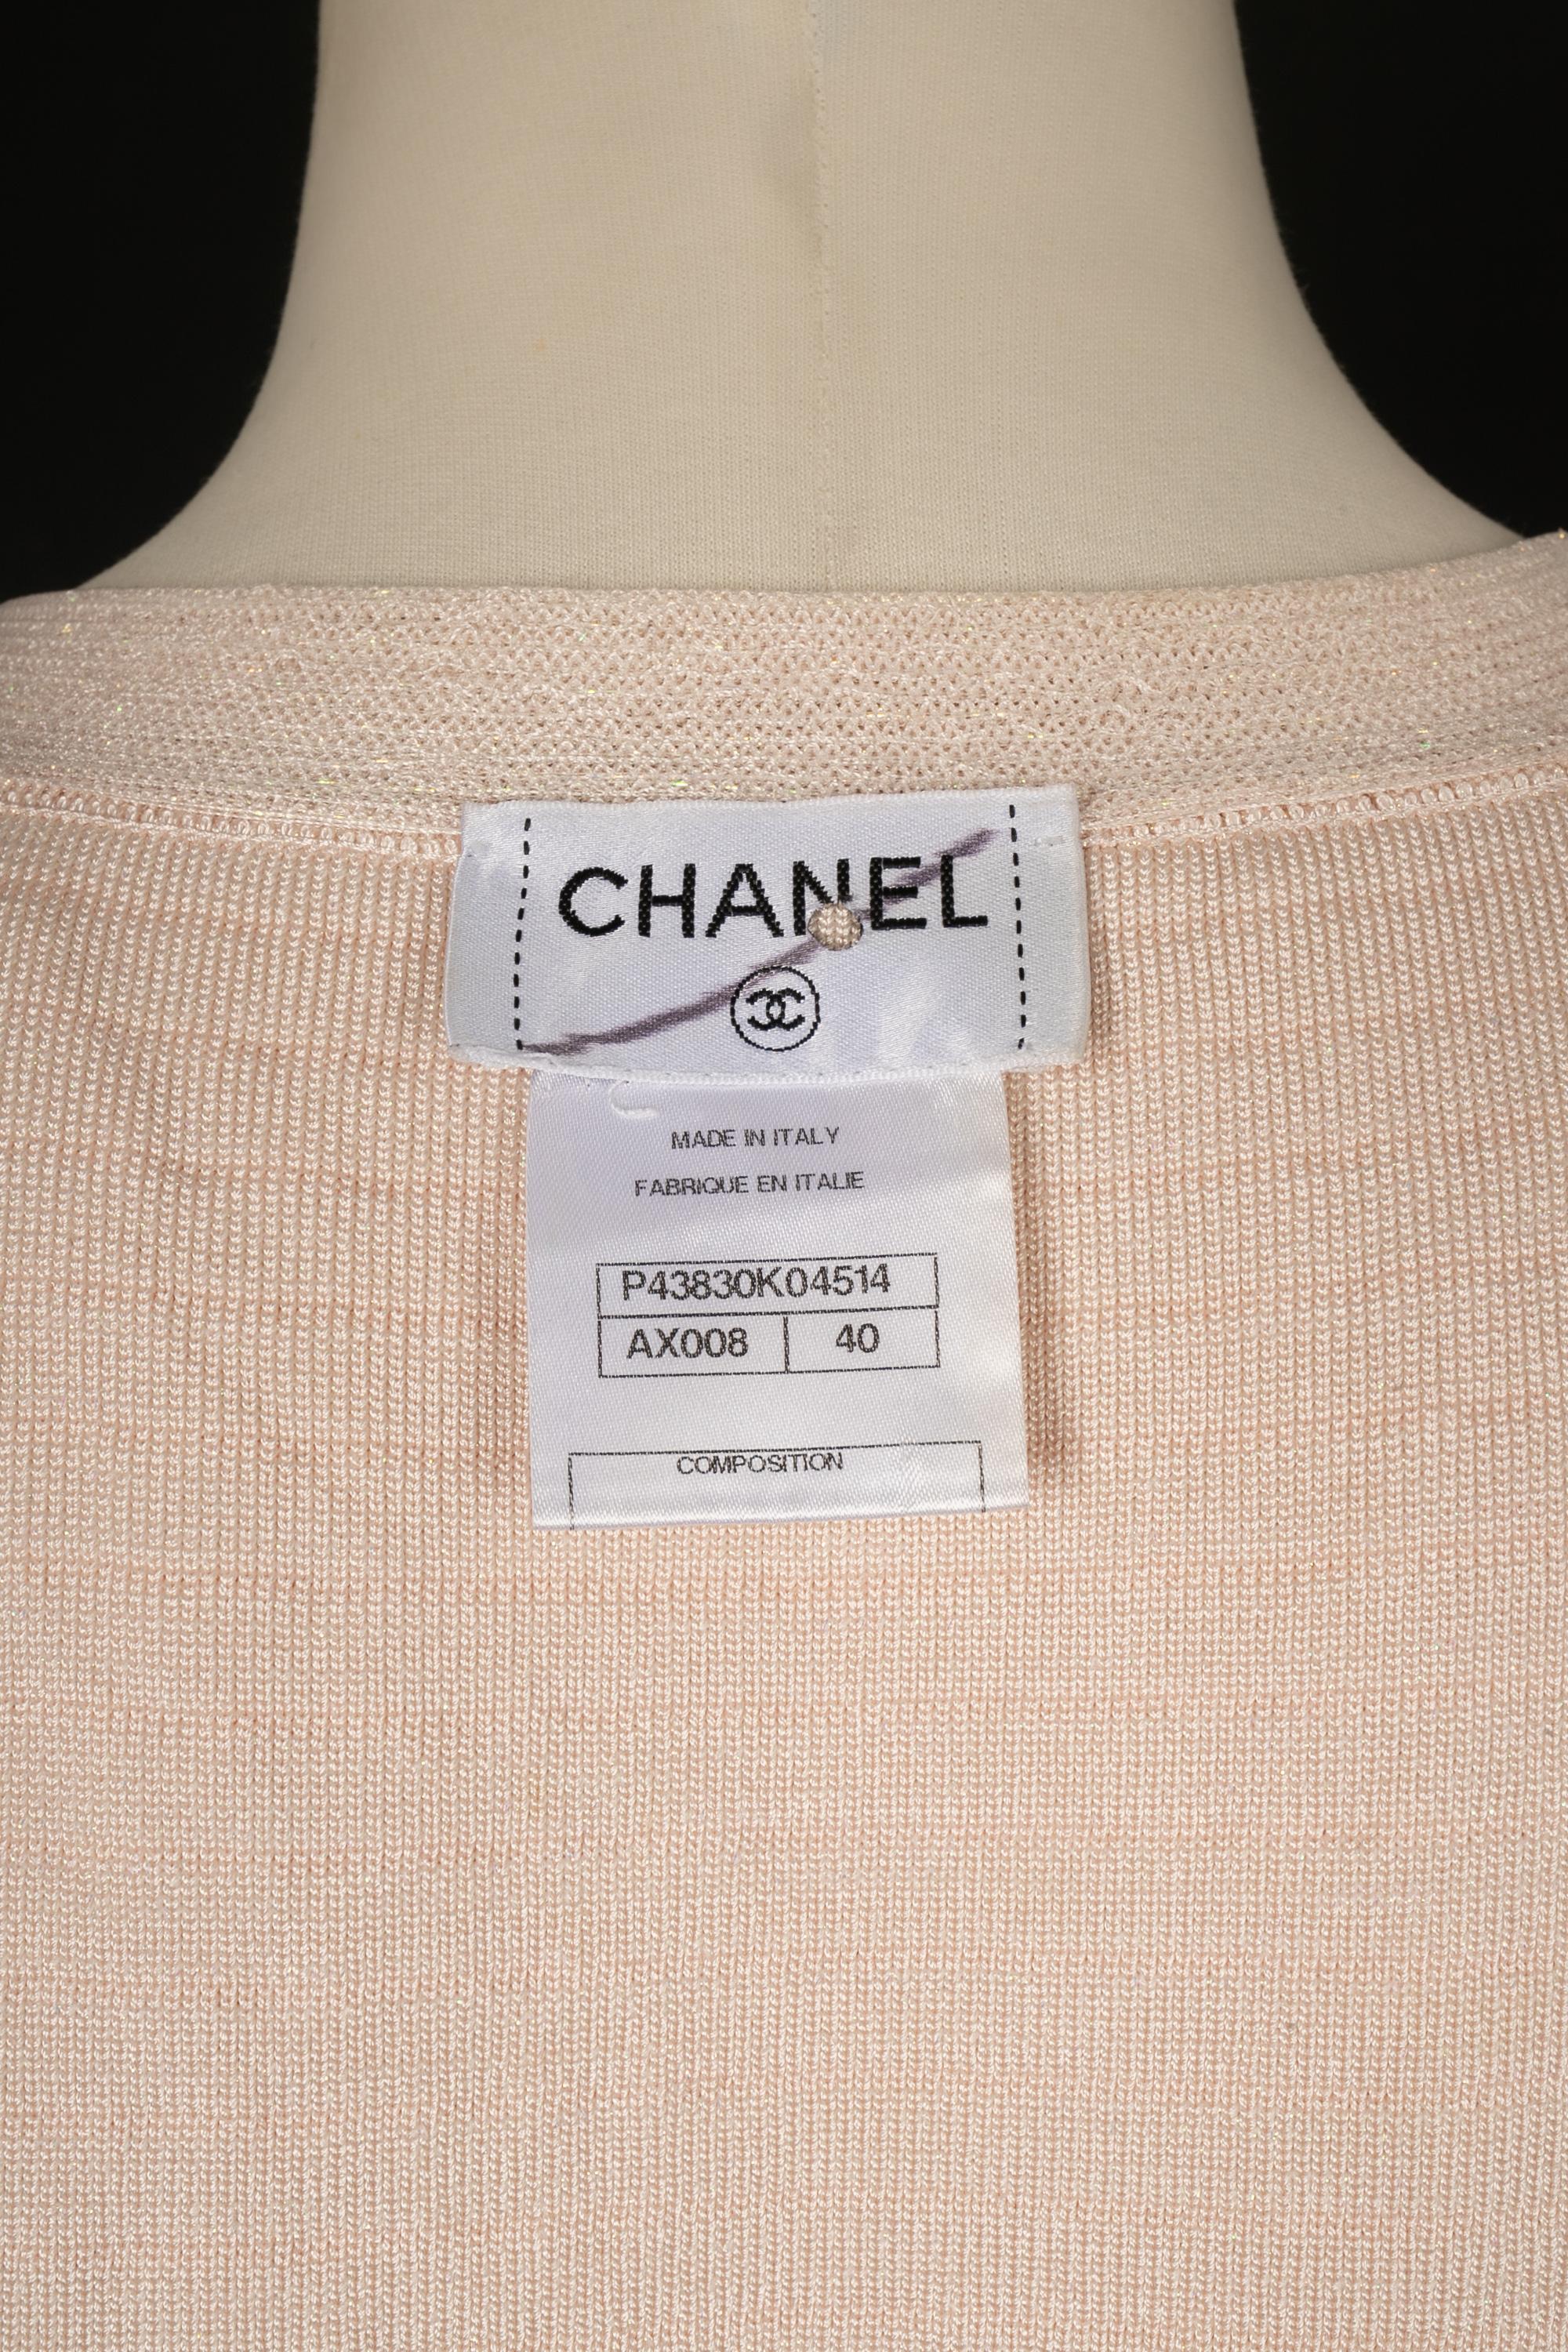 Chanel cardigan / jacket 2012 For Sale 3